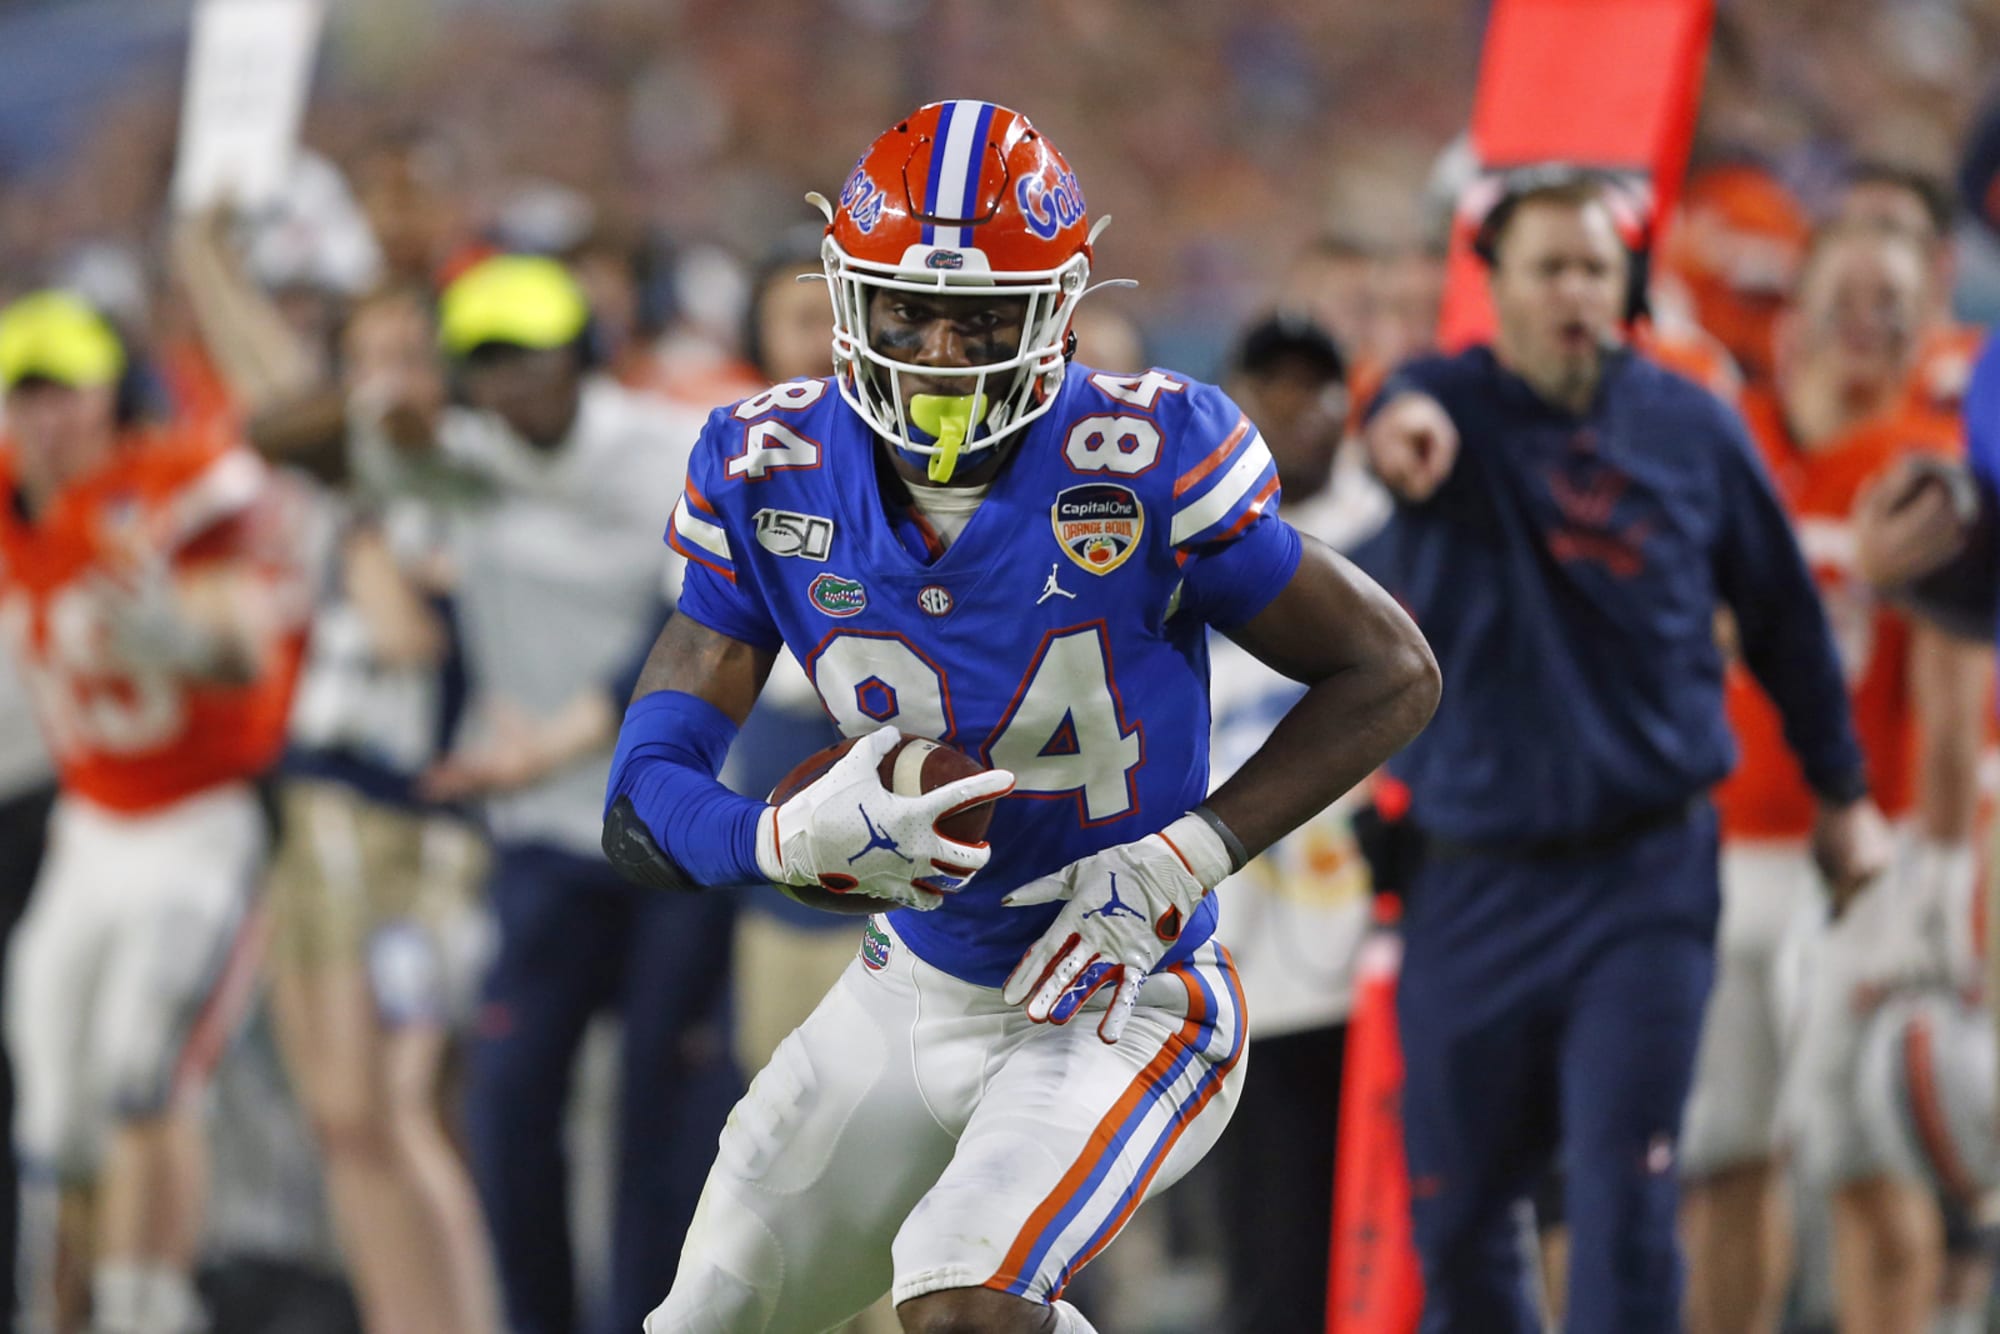 Florida Gators: Is Kyle Pitts a potential Hall of Fame player?